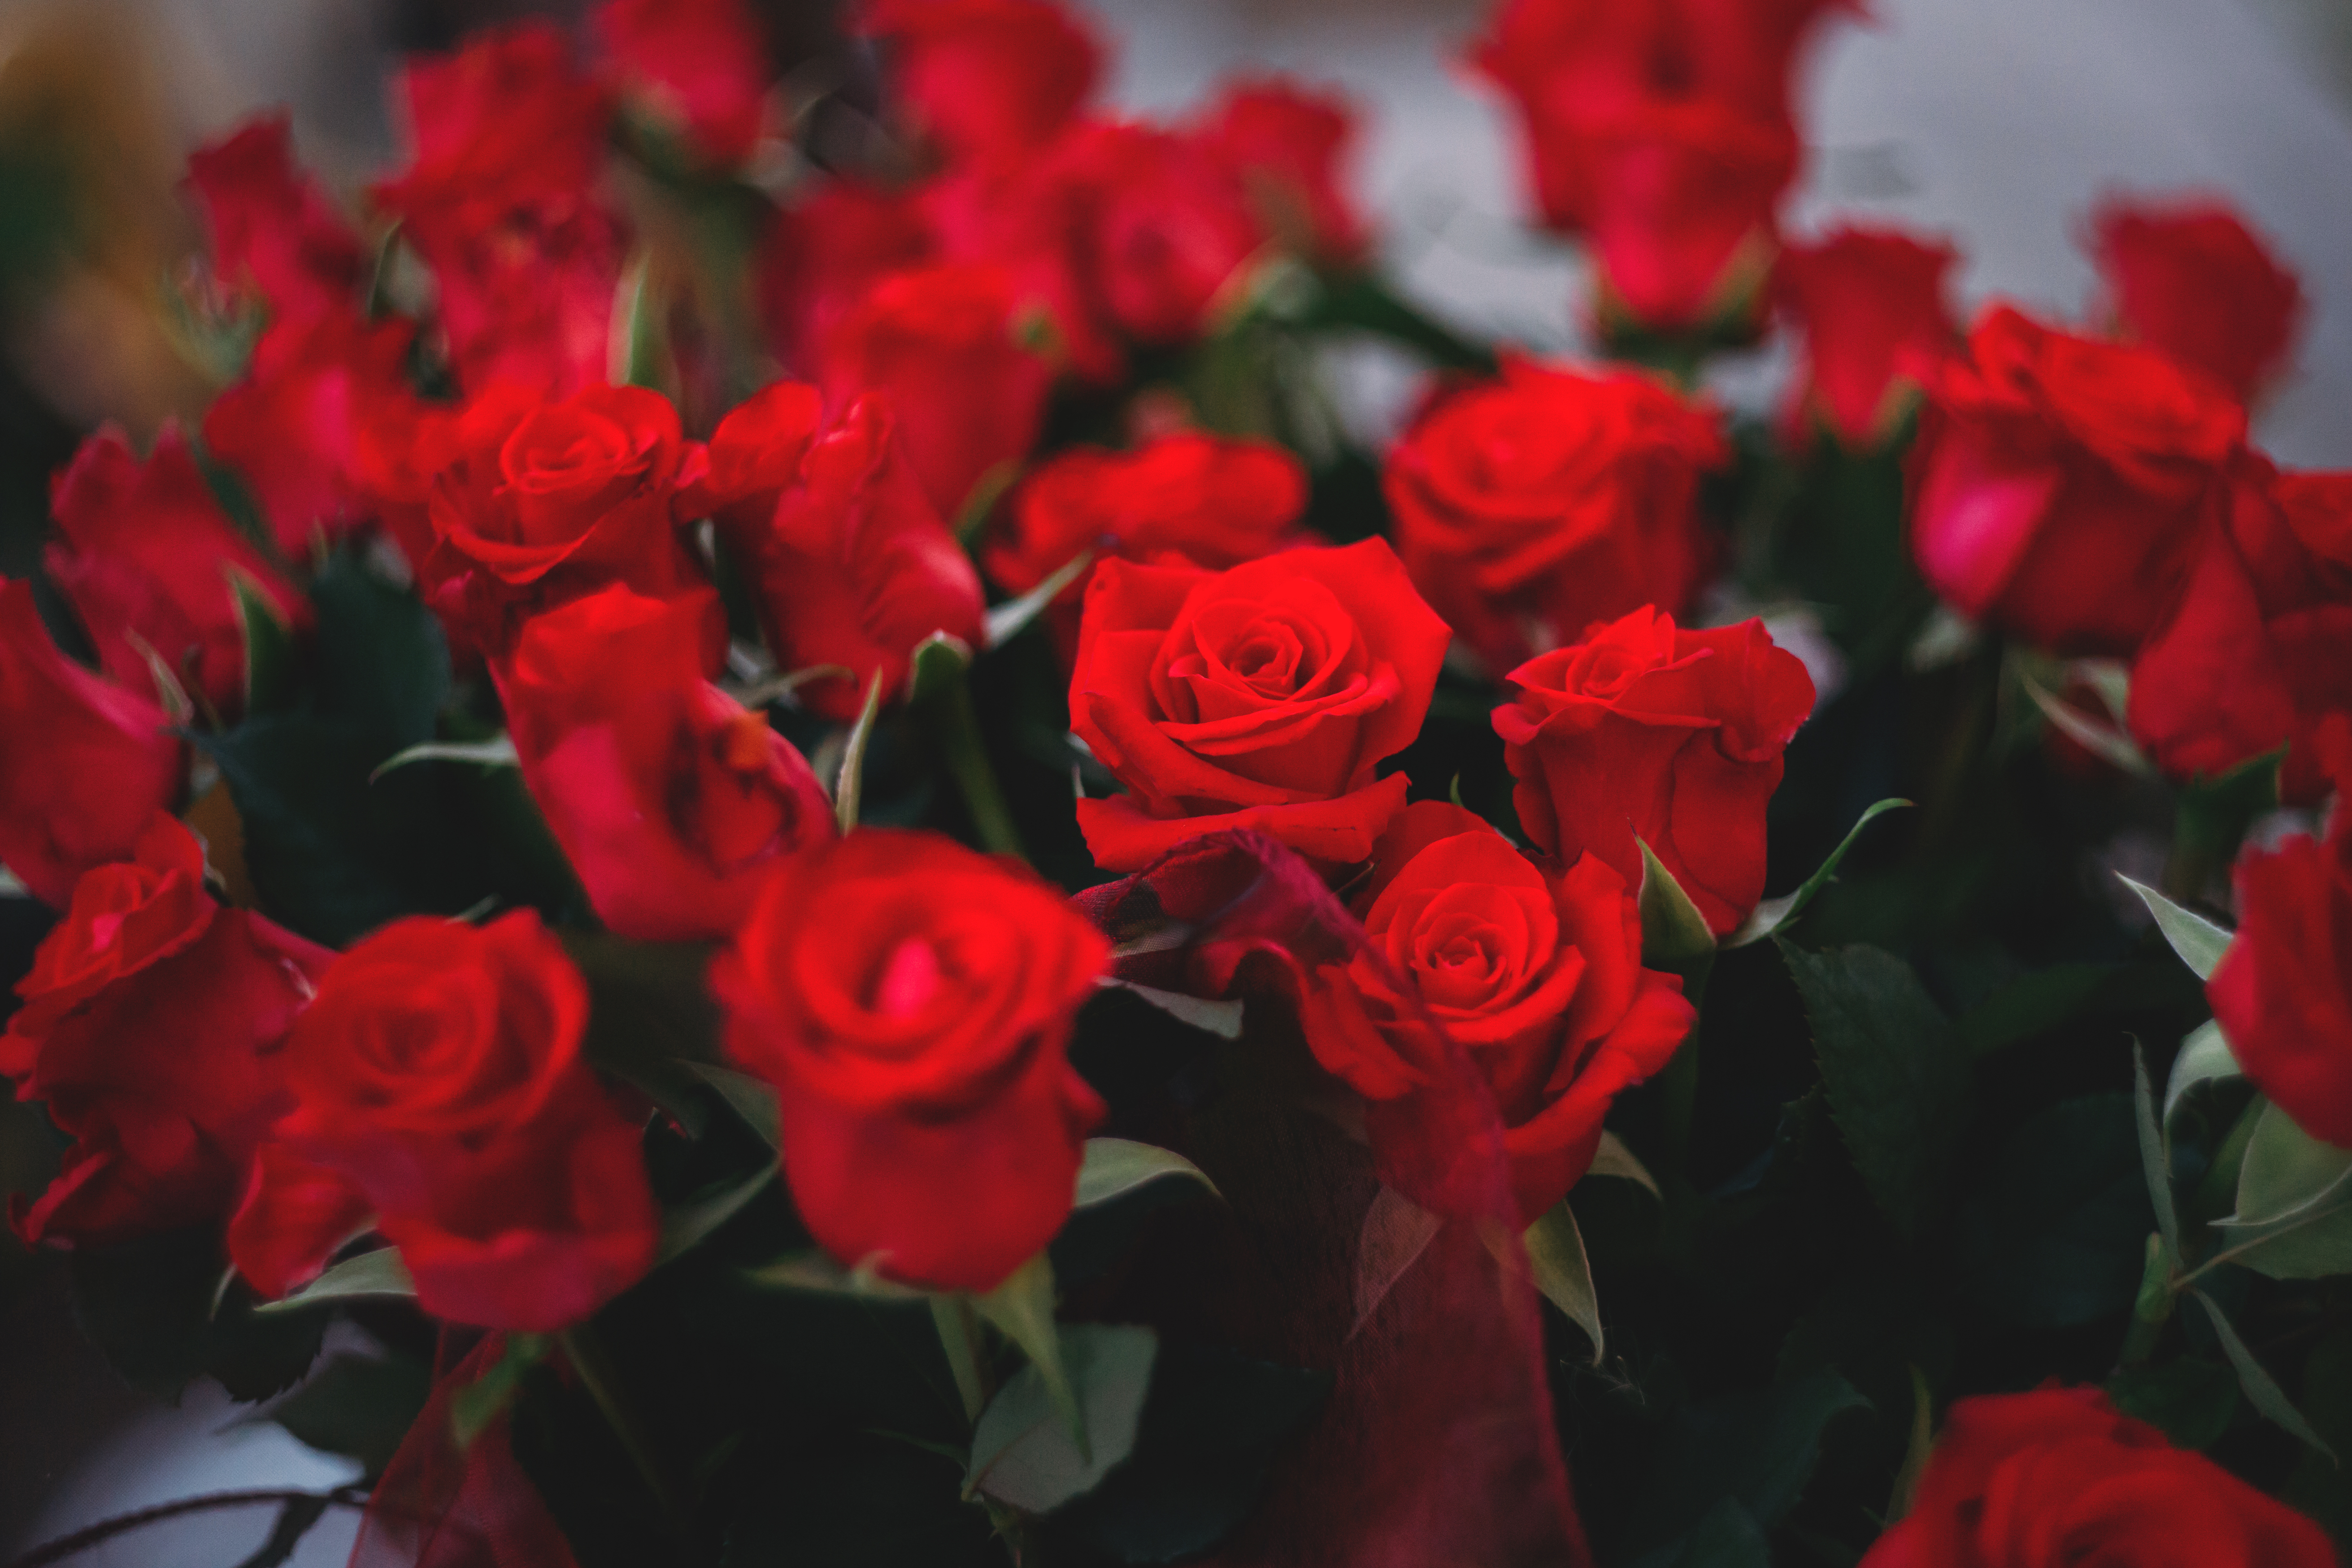 Big bouquet of red roses - freestocks.org - Free stock photo